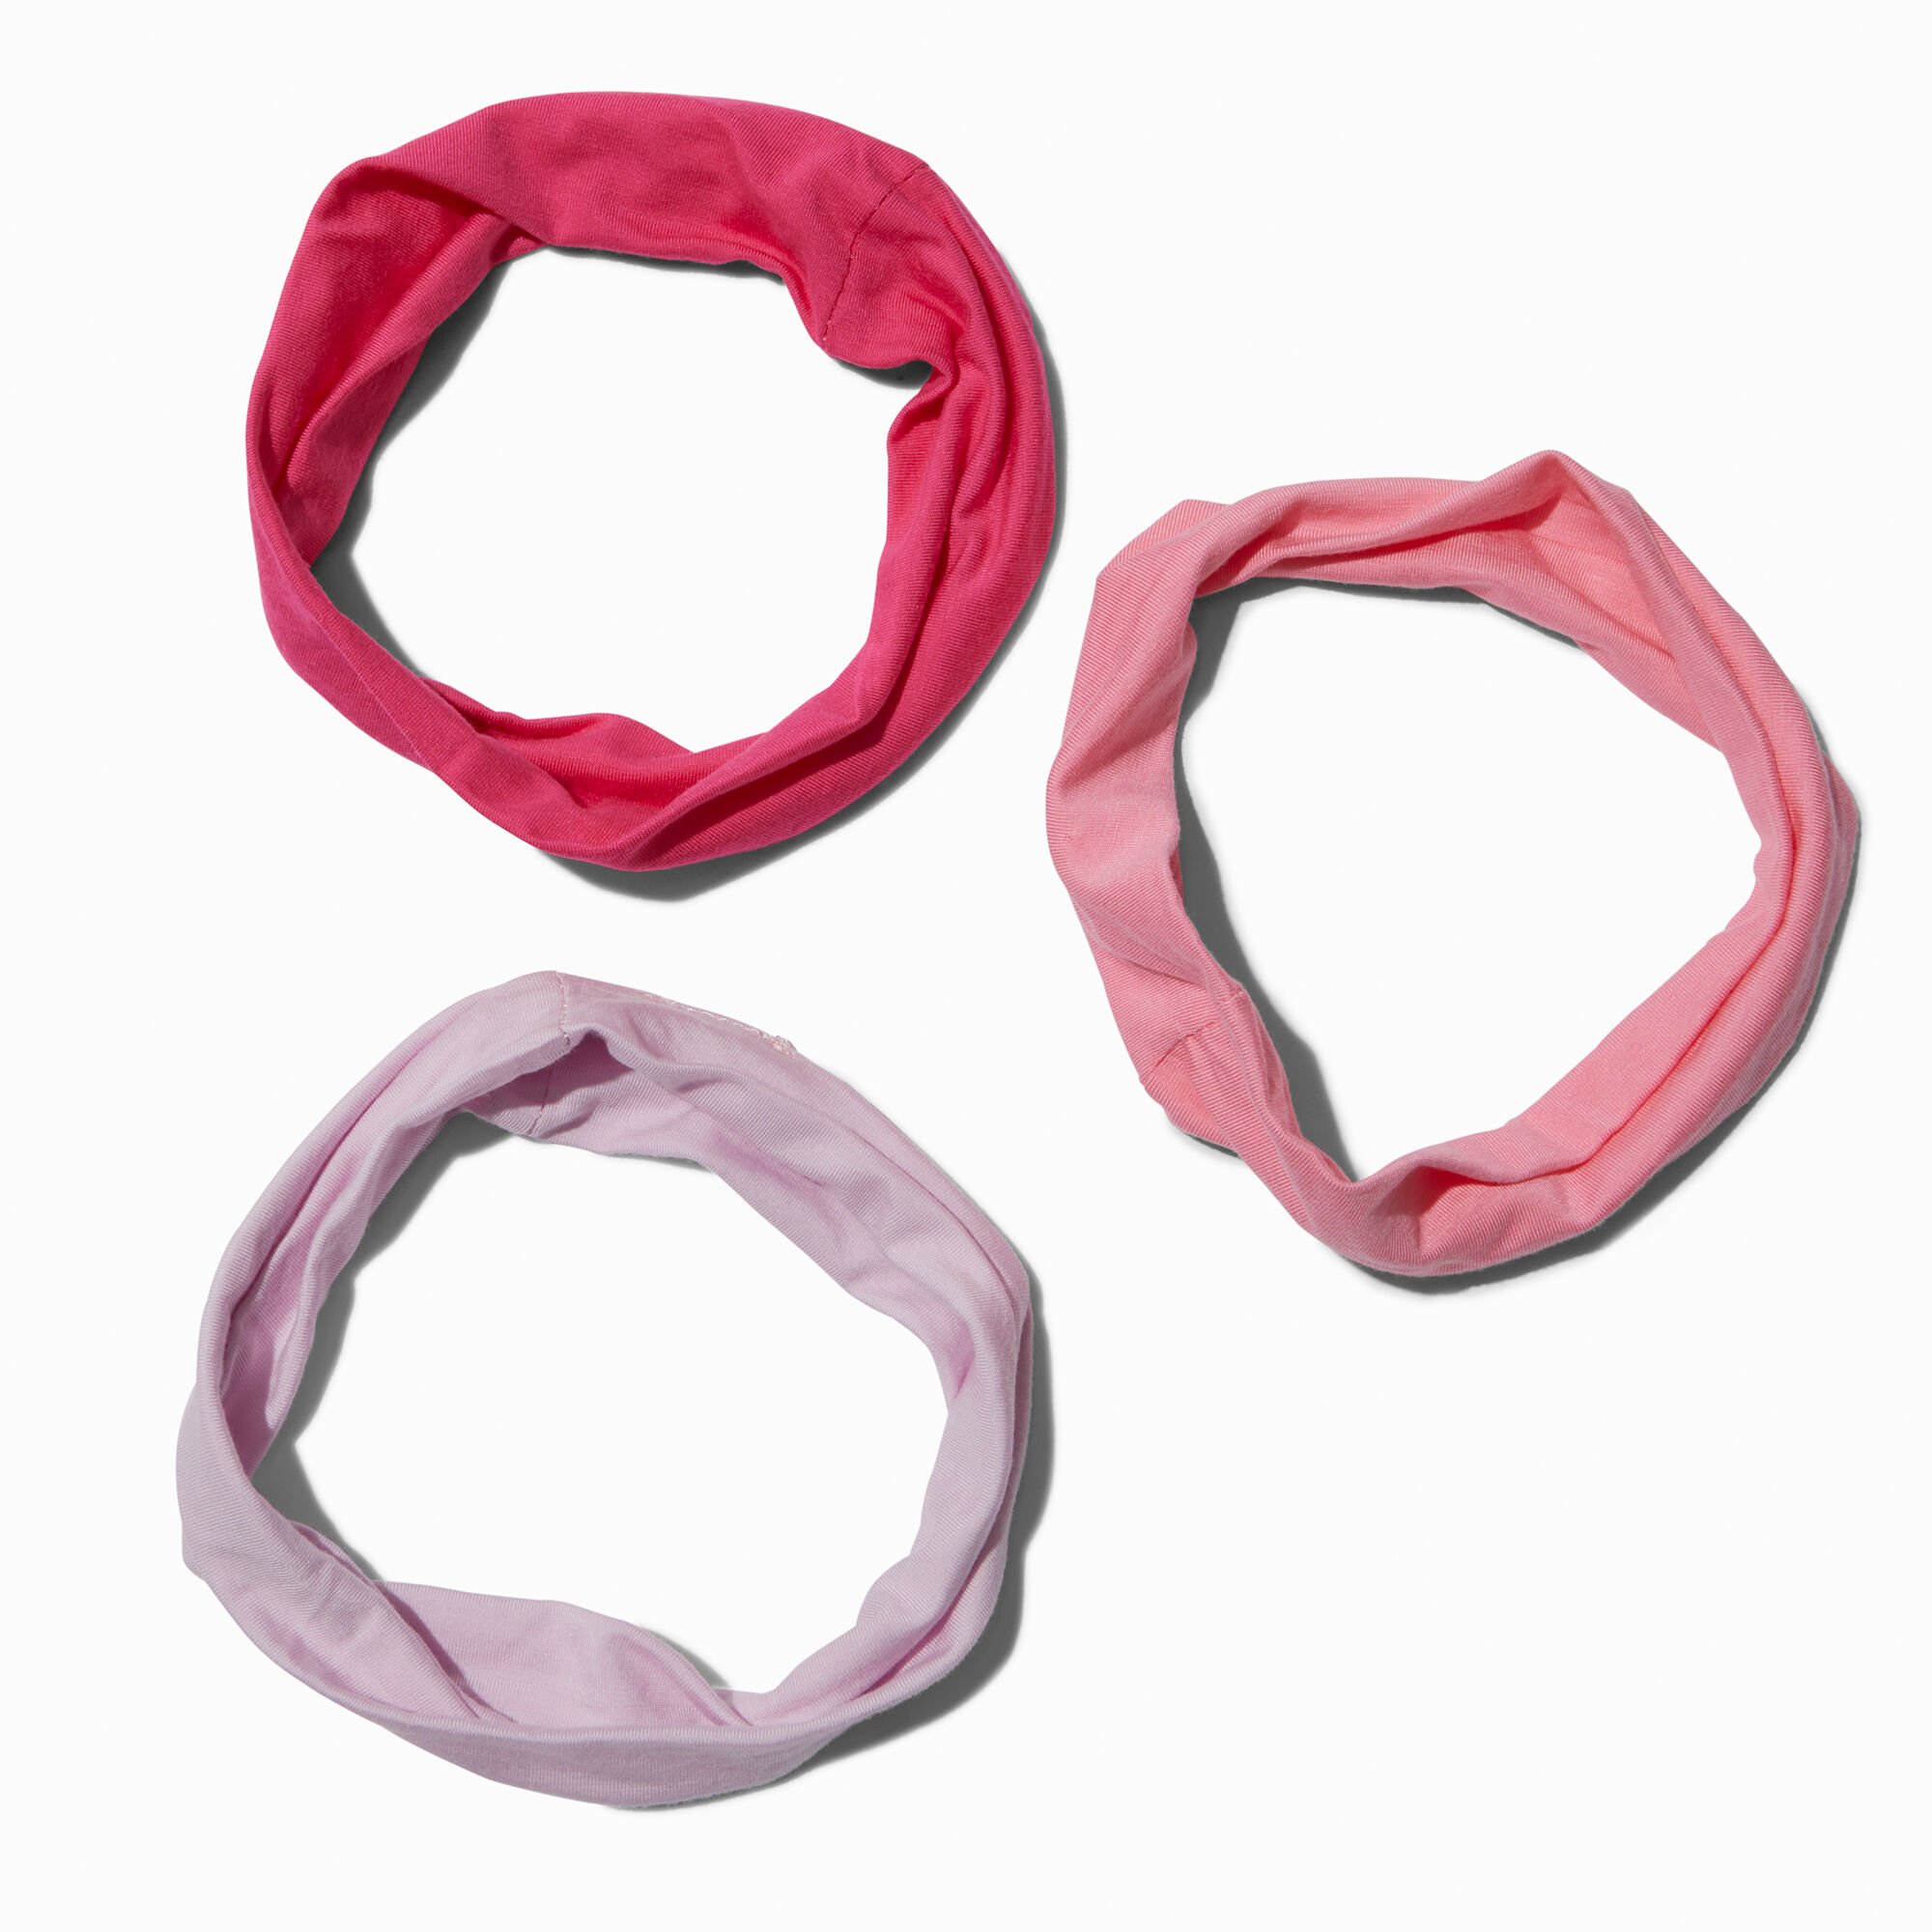 View Claires Mixed Headwraps 3 Pack Pink information